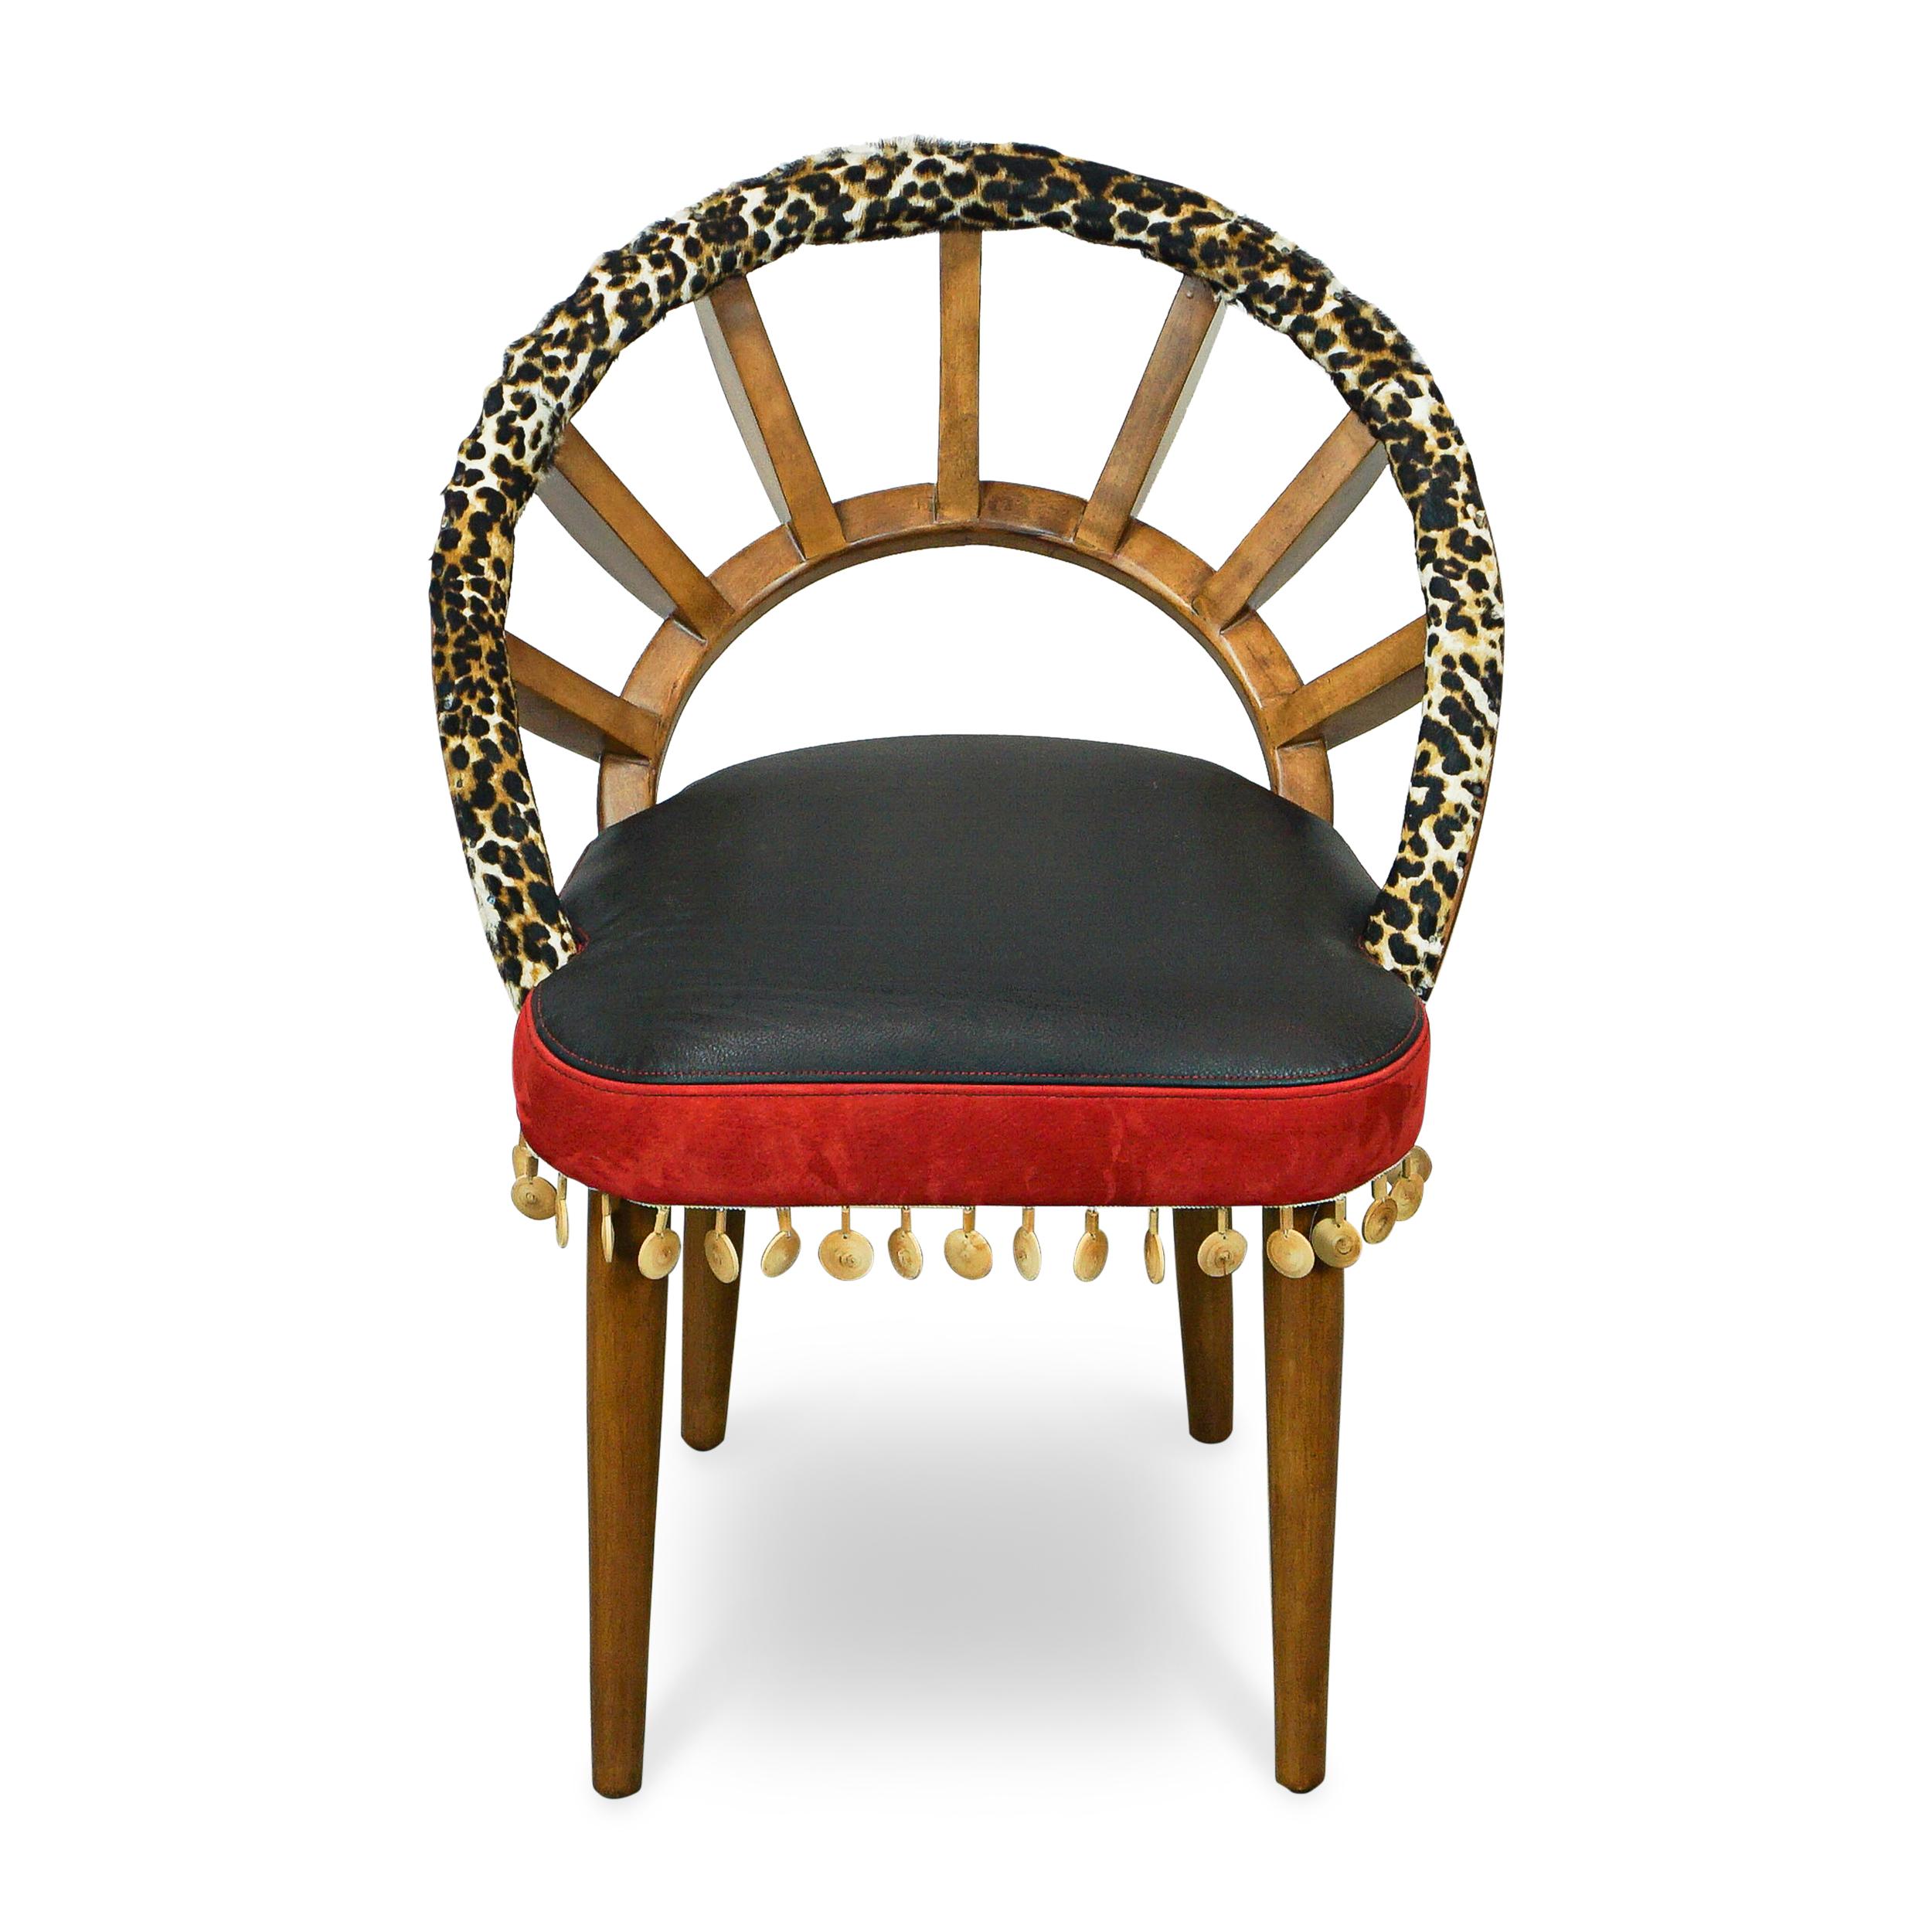 American Ribbed Wood Chair with Cheetah Hair on Hide, Red + Black Leather and Wood Bead For Sale